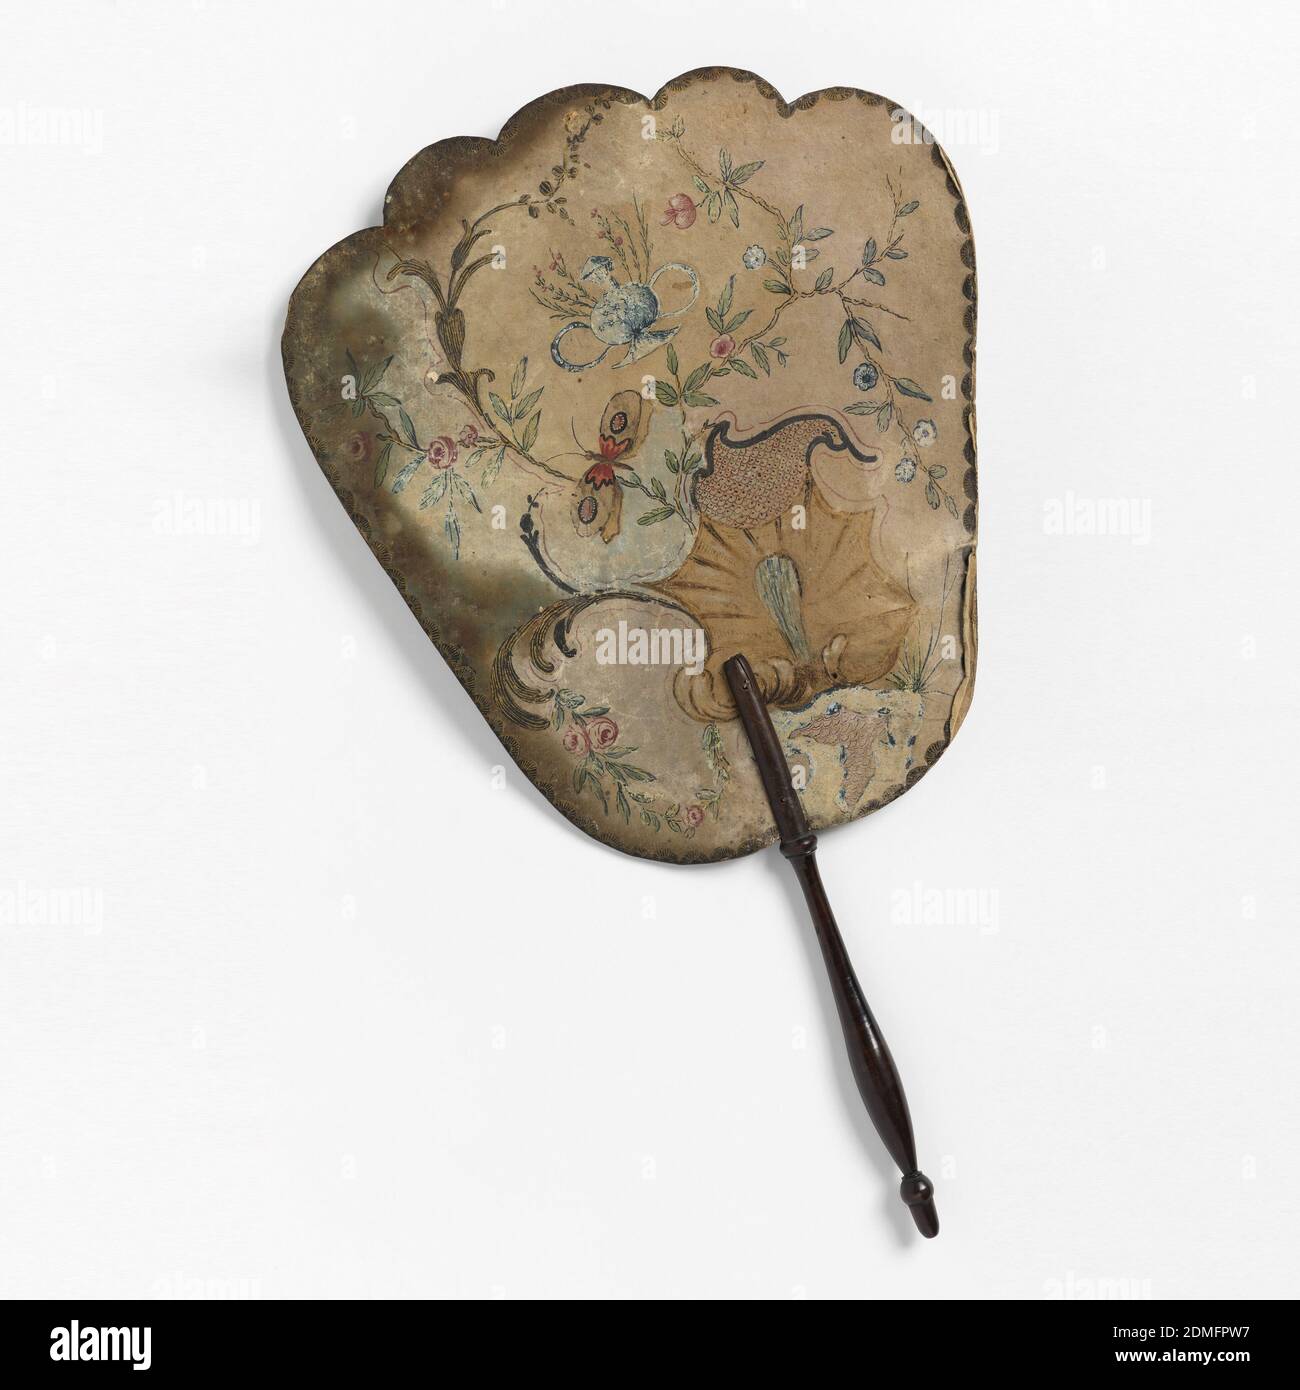 Handscreen, Gilded and painted paper leaf, turned wood handle, Handscreen with a gilded and hand-painted paper leaf. Obverse: rocaille, insects, flowers and blue and white porcelain. Reverse: a flowering branch with pink and blue blossoms. Turned wood handle., France, England, mid- 18th century, costume & accessories, Handscreen Stock Photo